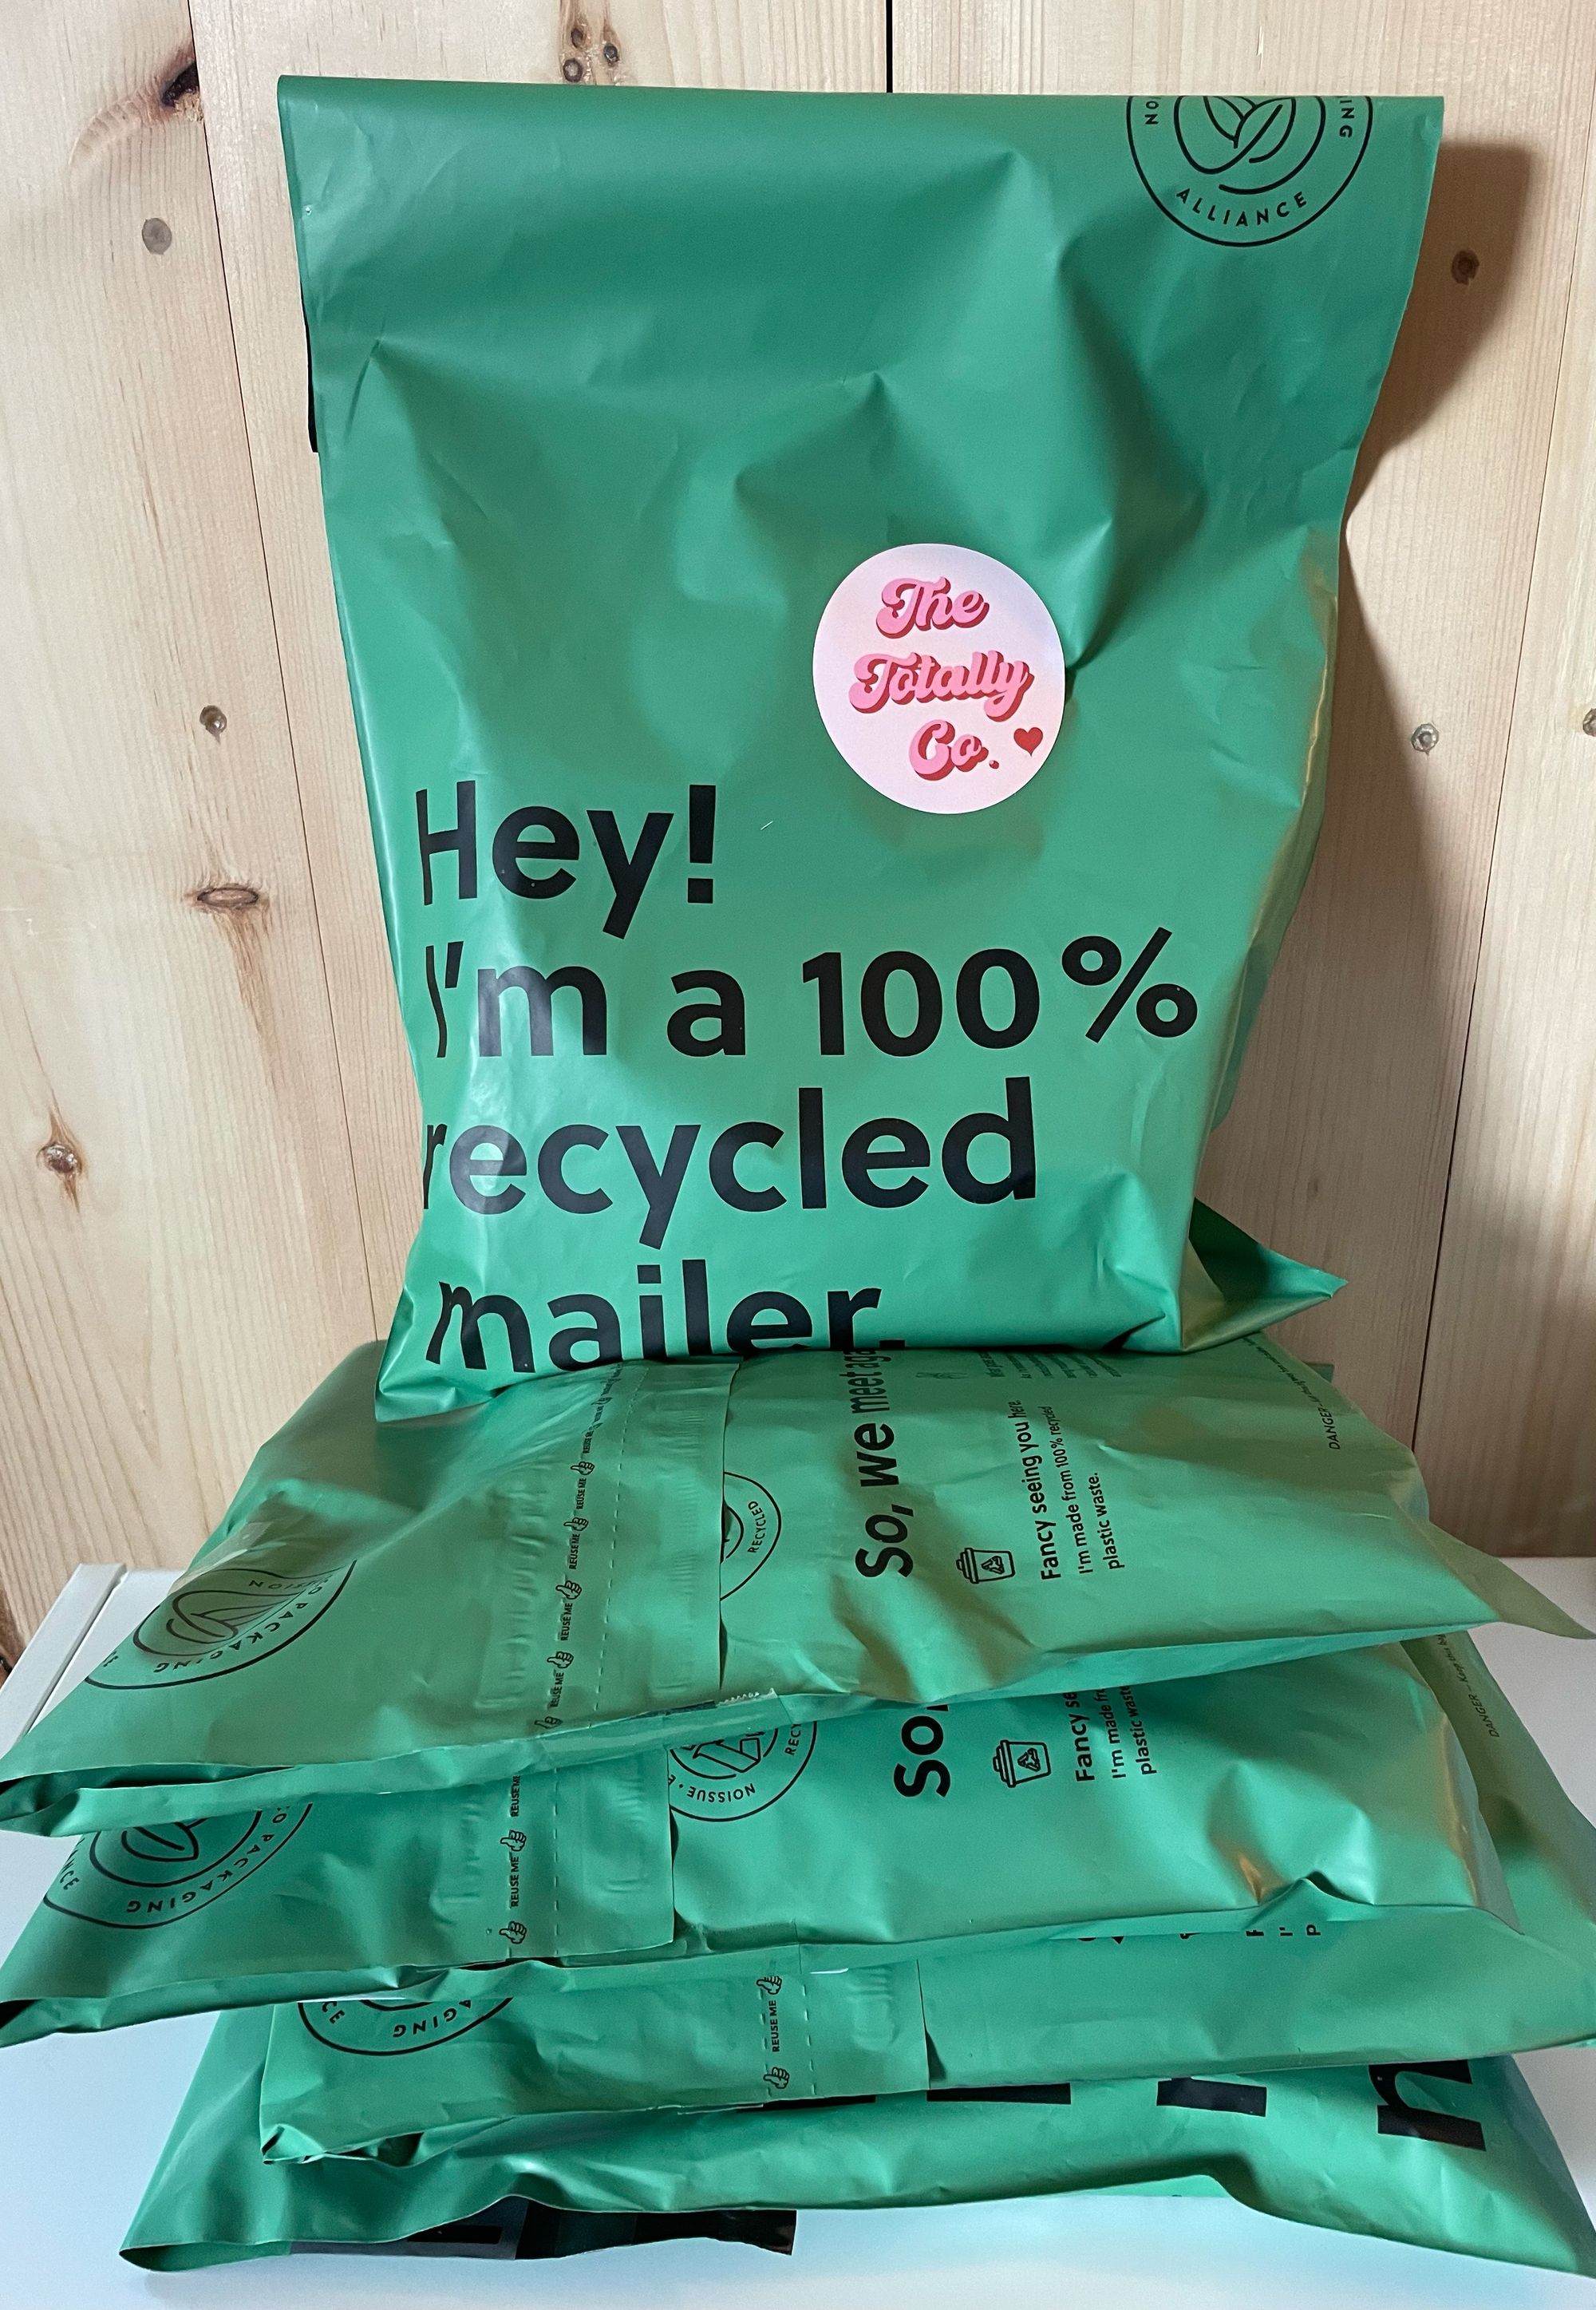 The Totally Co.: Sustainable Totes and Apparel You’ll Tote-ally Love